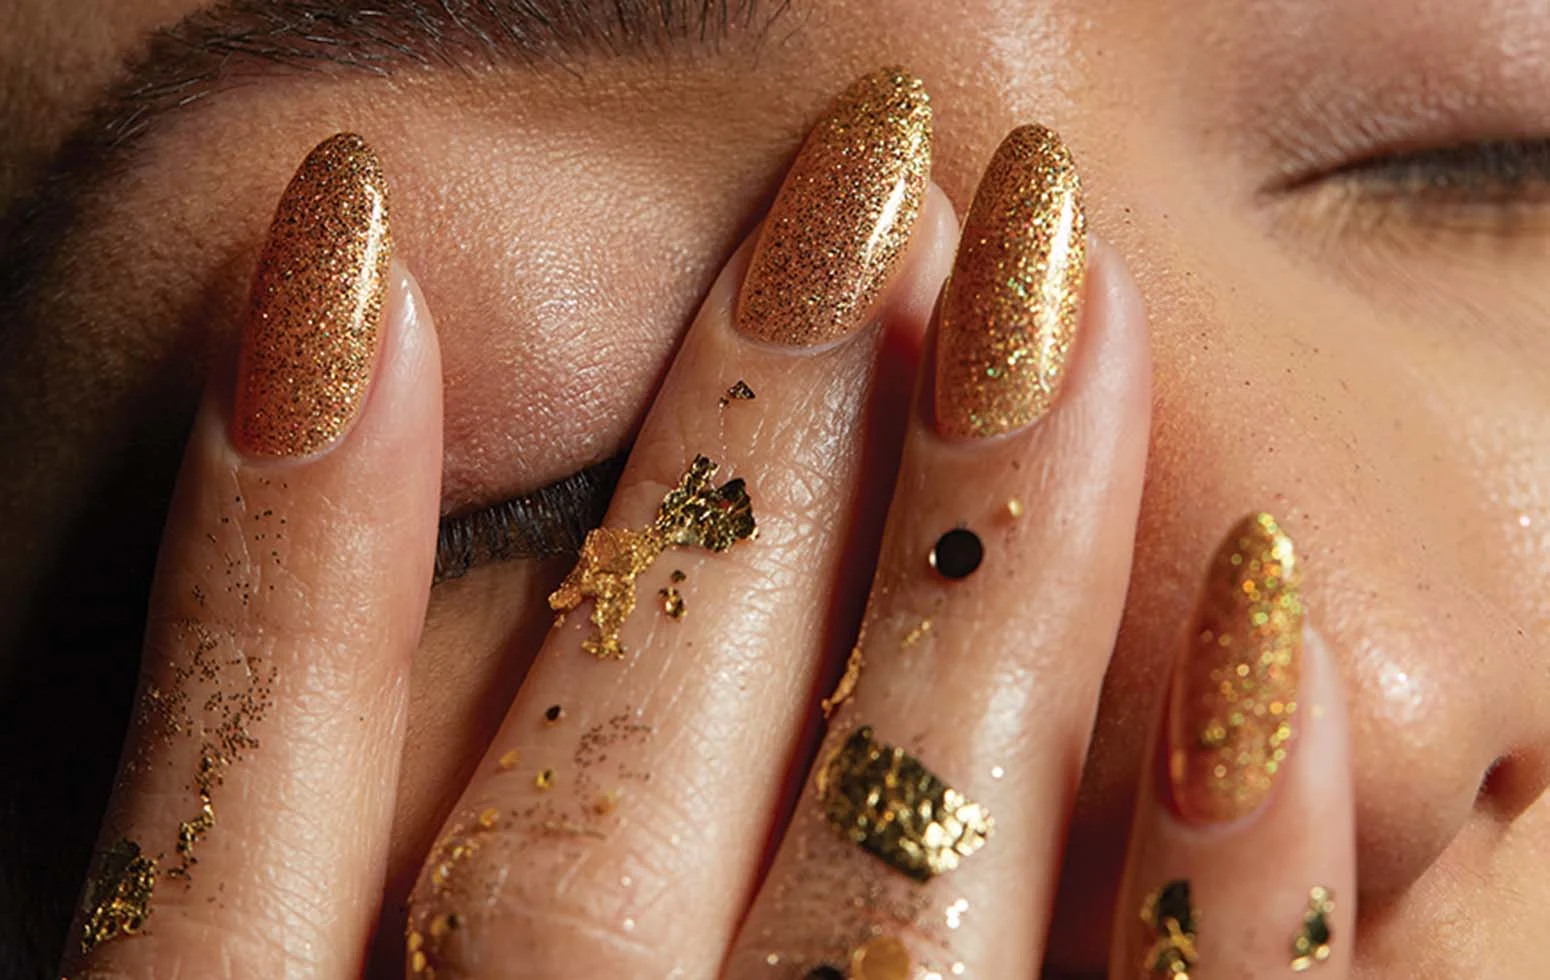 Introducing #OPIHiDefGlitters: The Glitter Effect Your Nails Need